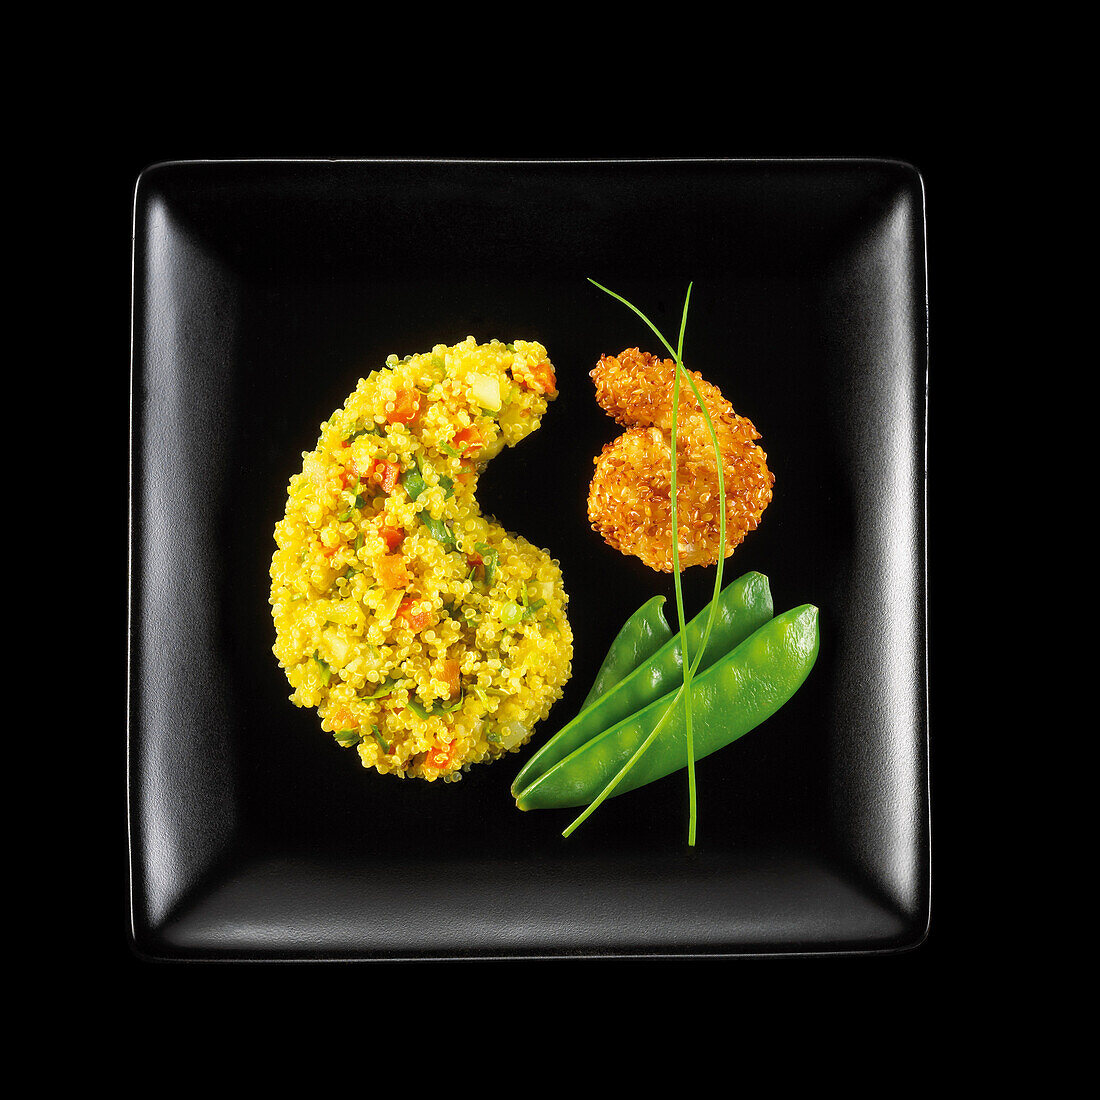 Fried king prawn coated in sesame seeds,yellow quinoa and crisp vegetables on a black background